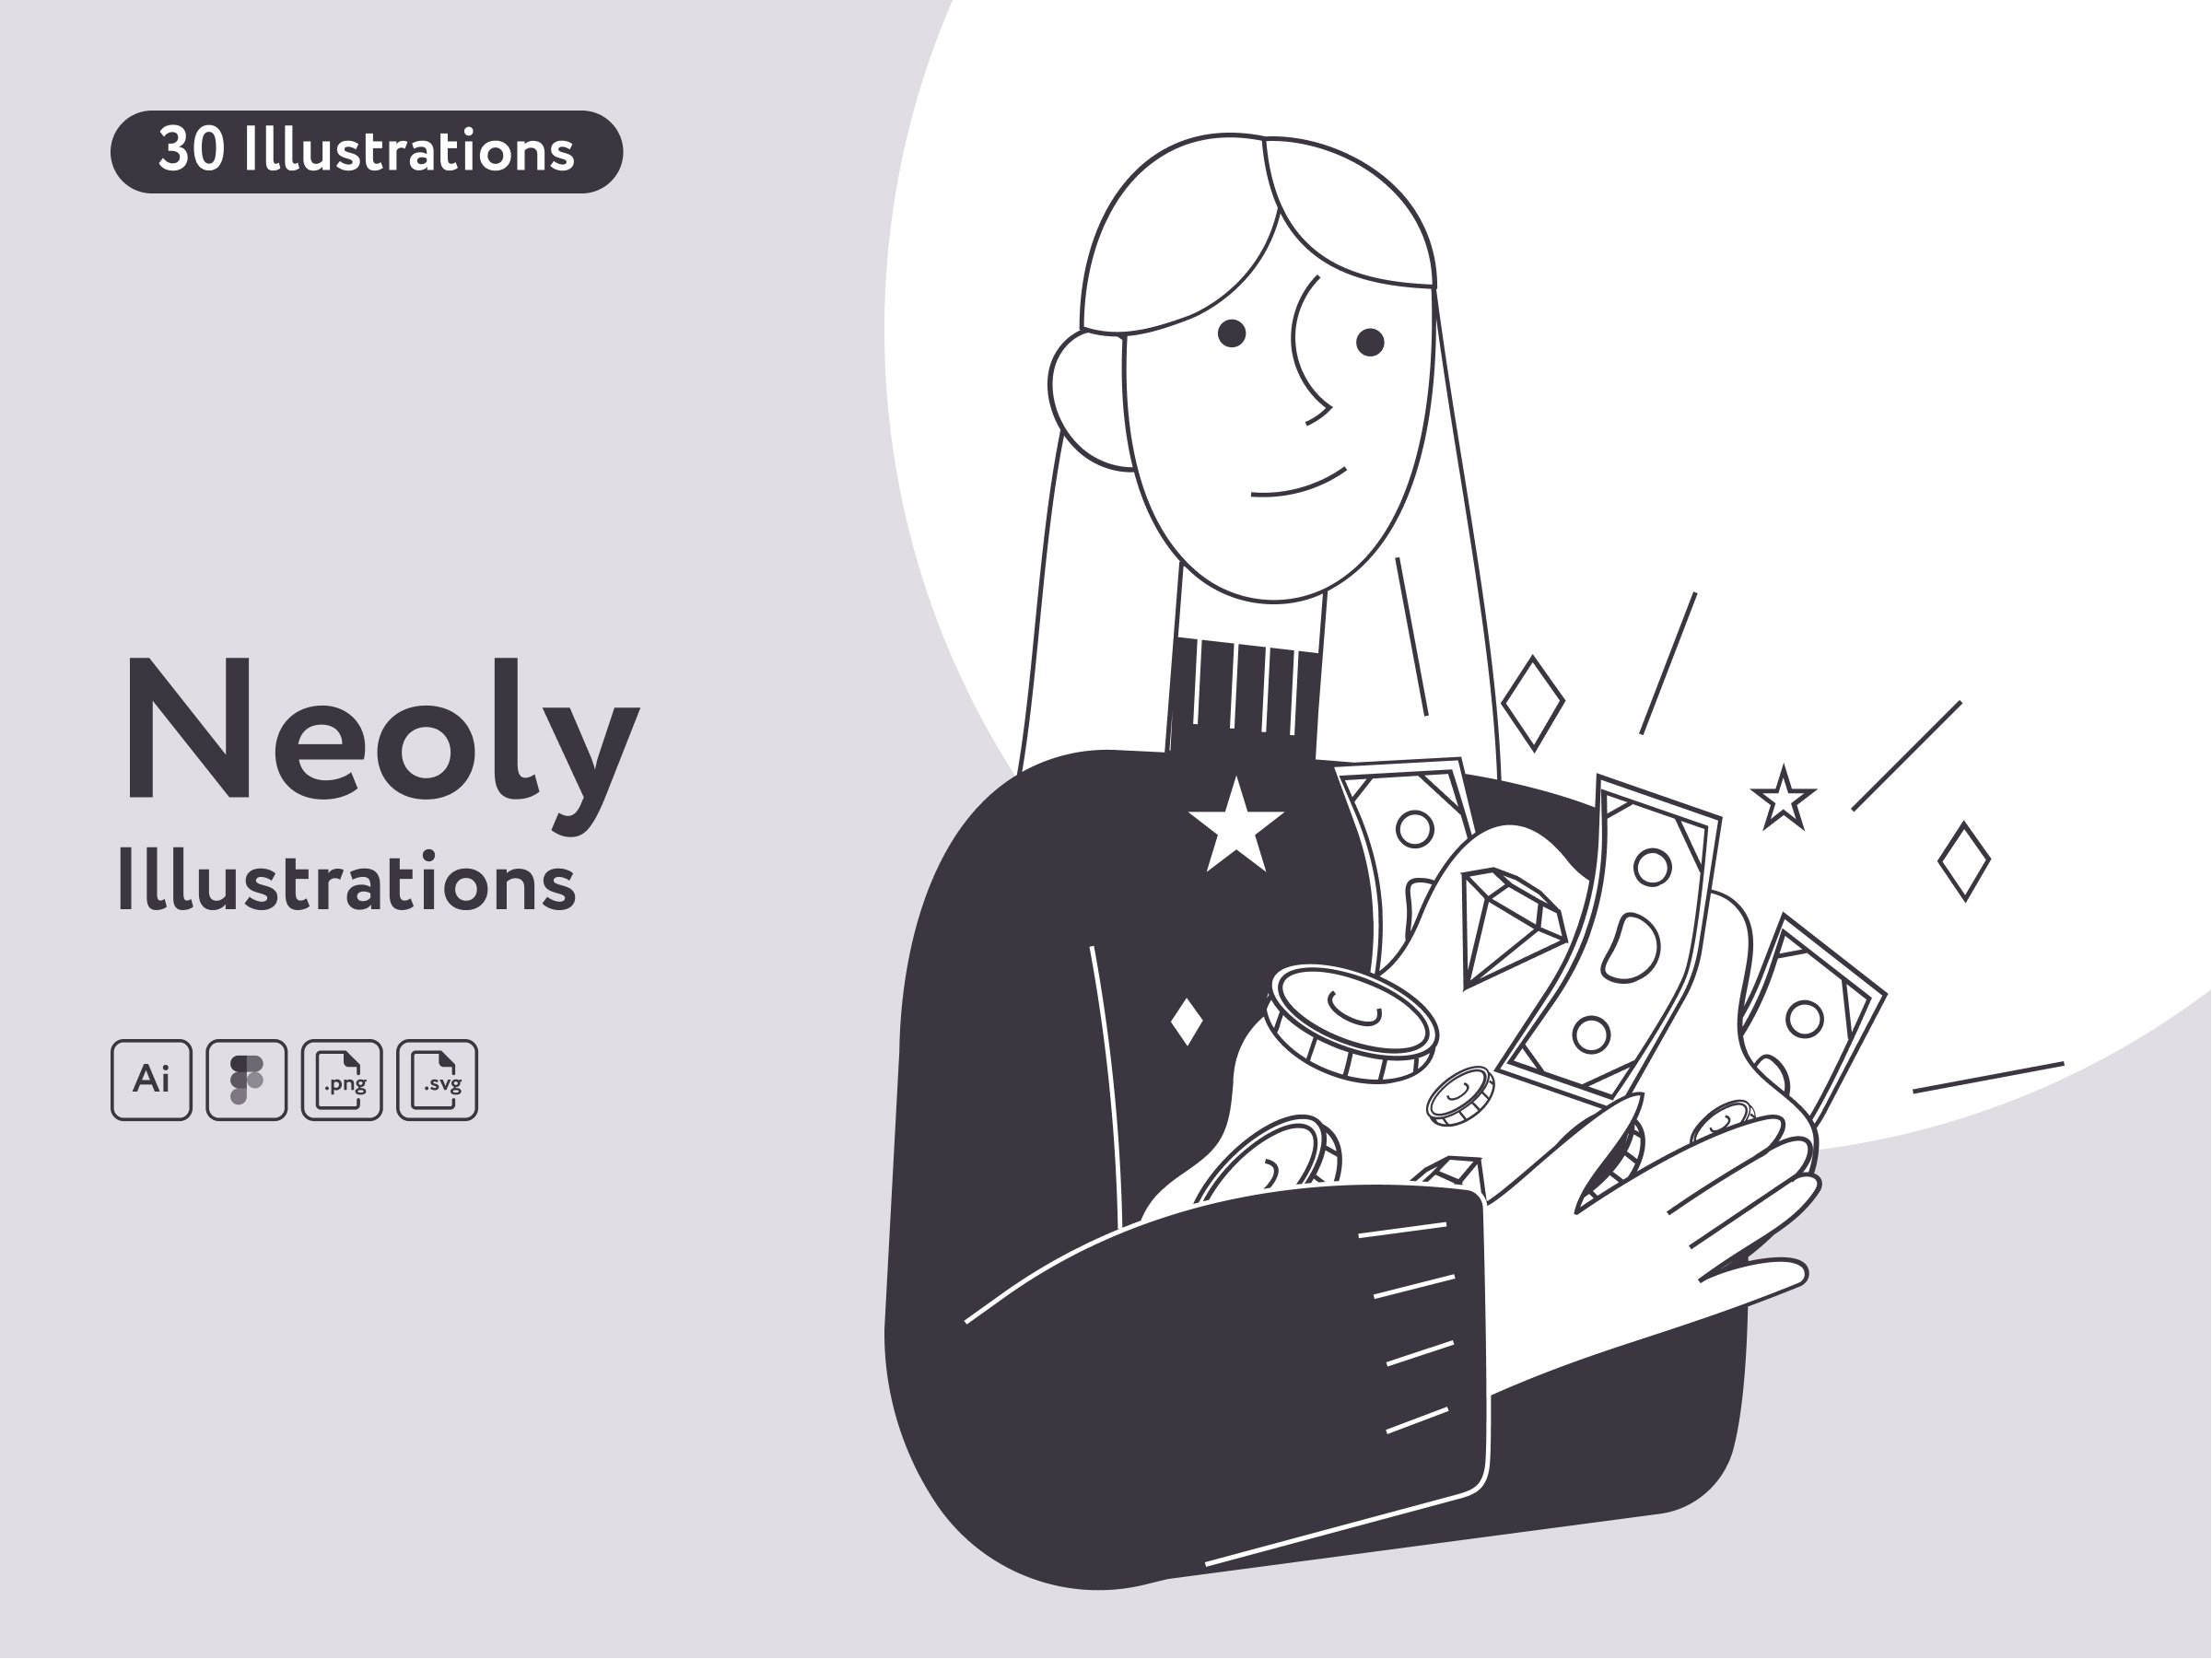 Neoly Finance Illustrations cover image.